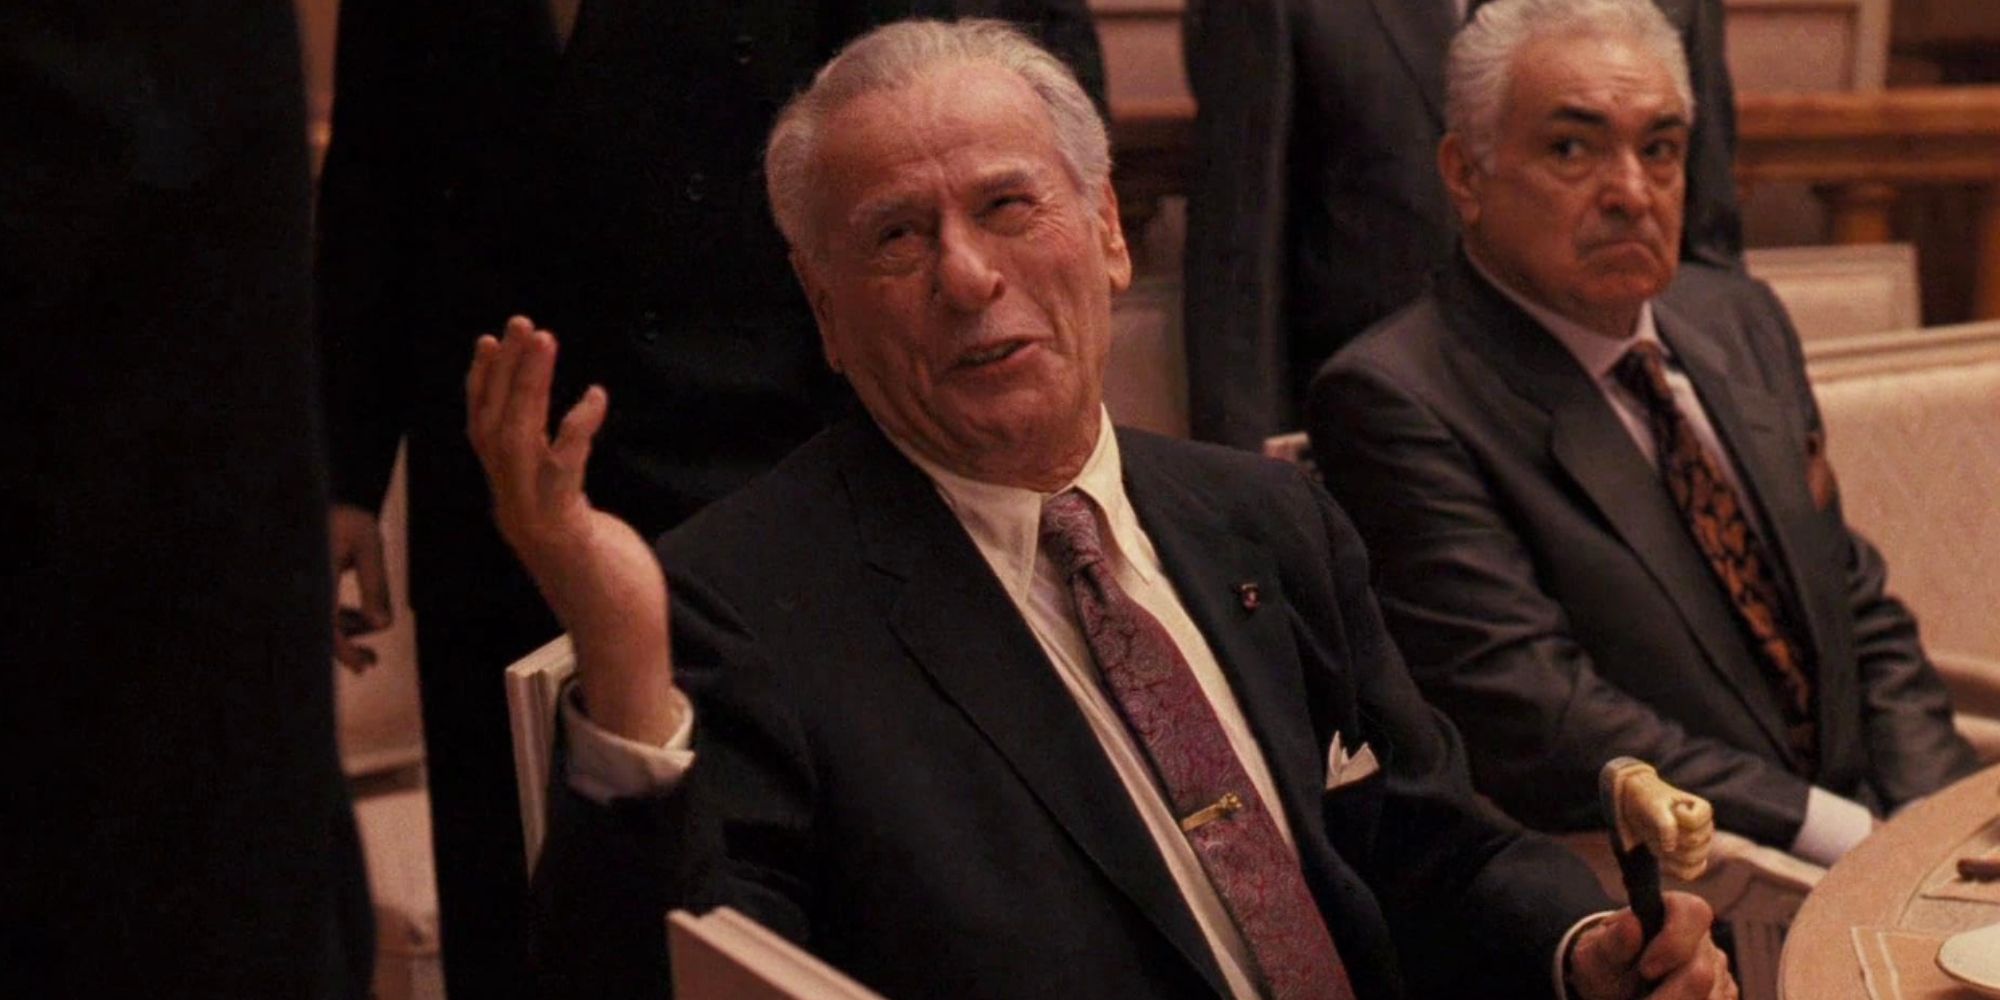 Don Altobello smiling while talking to someone in The Godfather_ Part III - 1990